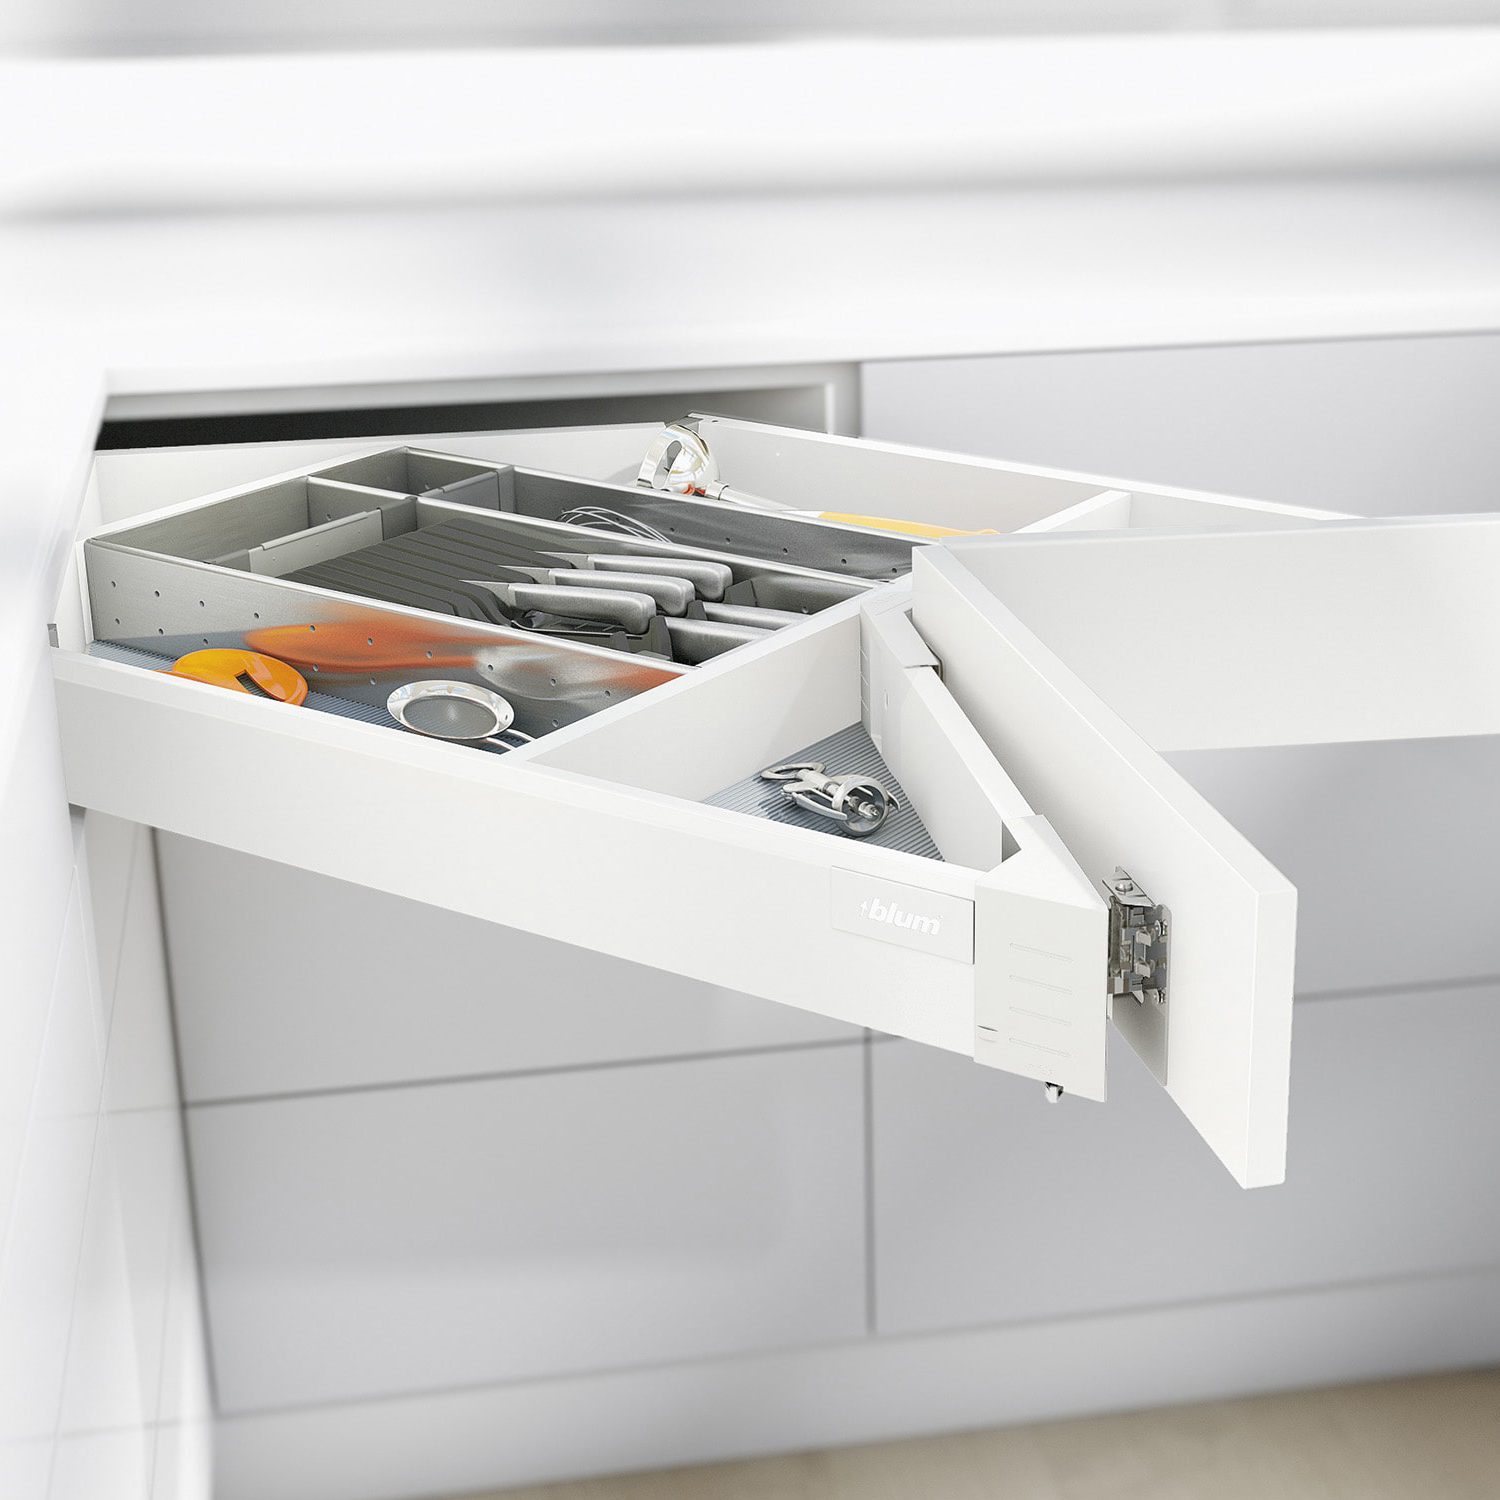 Corner drawers could be a feature, depending on your material selections